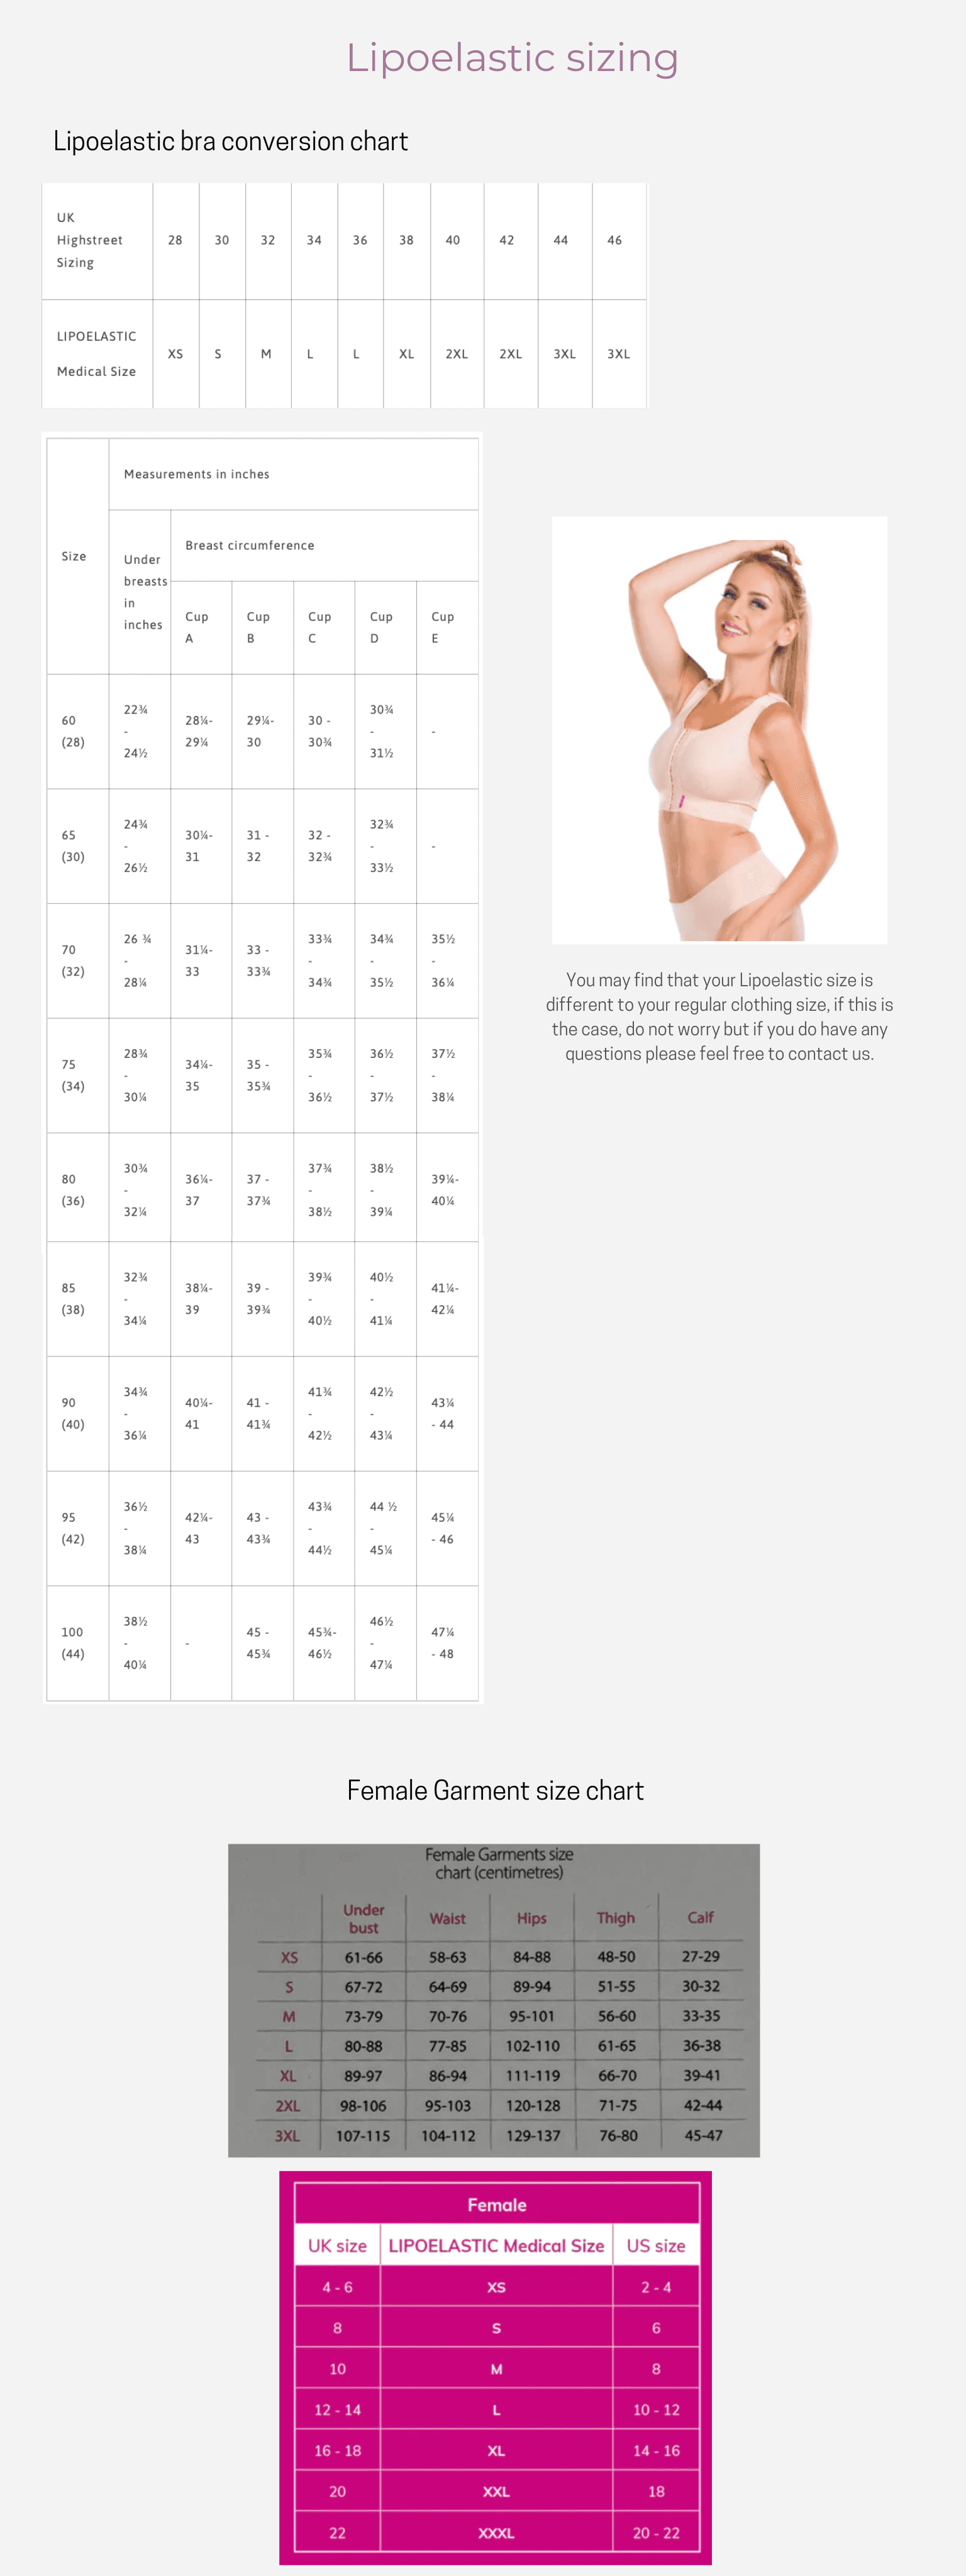 Lipoelastic compression post surgery bra and garment sizing